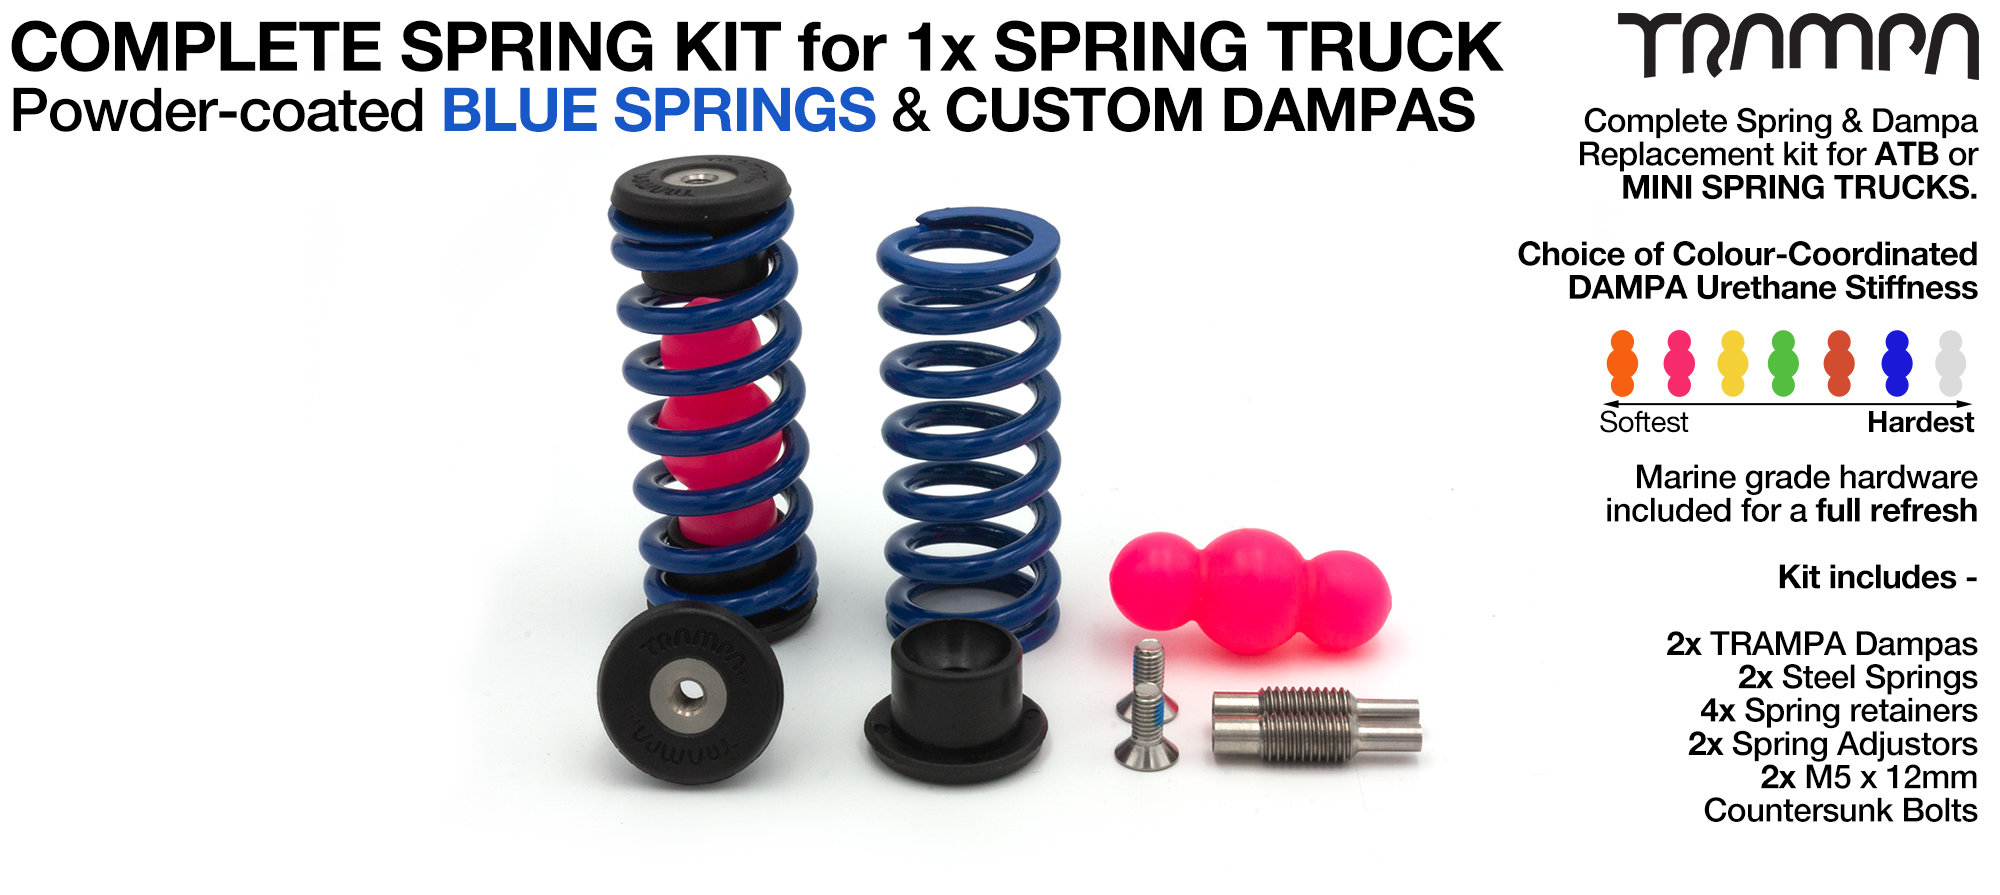 Spring kit Complete for 1x Truck - 2x Spring 2x Dampa 4x Spring Retainers 2x Spring Adjuster & 2 M5x12mm Countersunk Bolt  BLUE Springs  